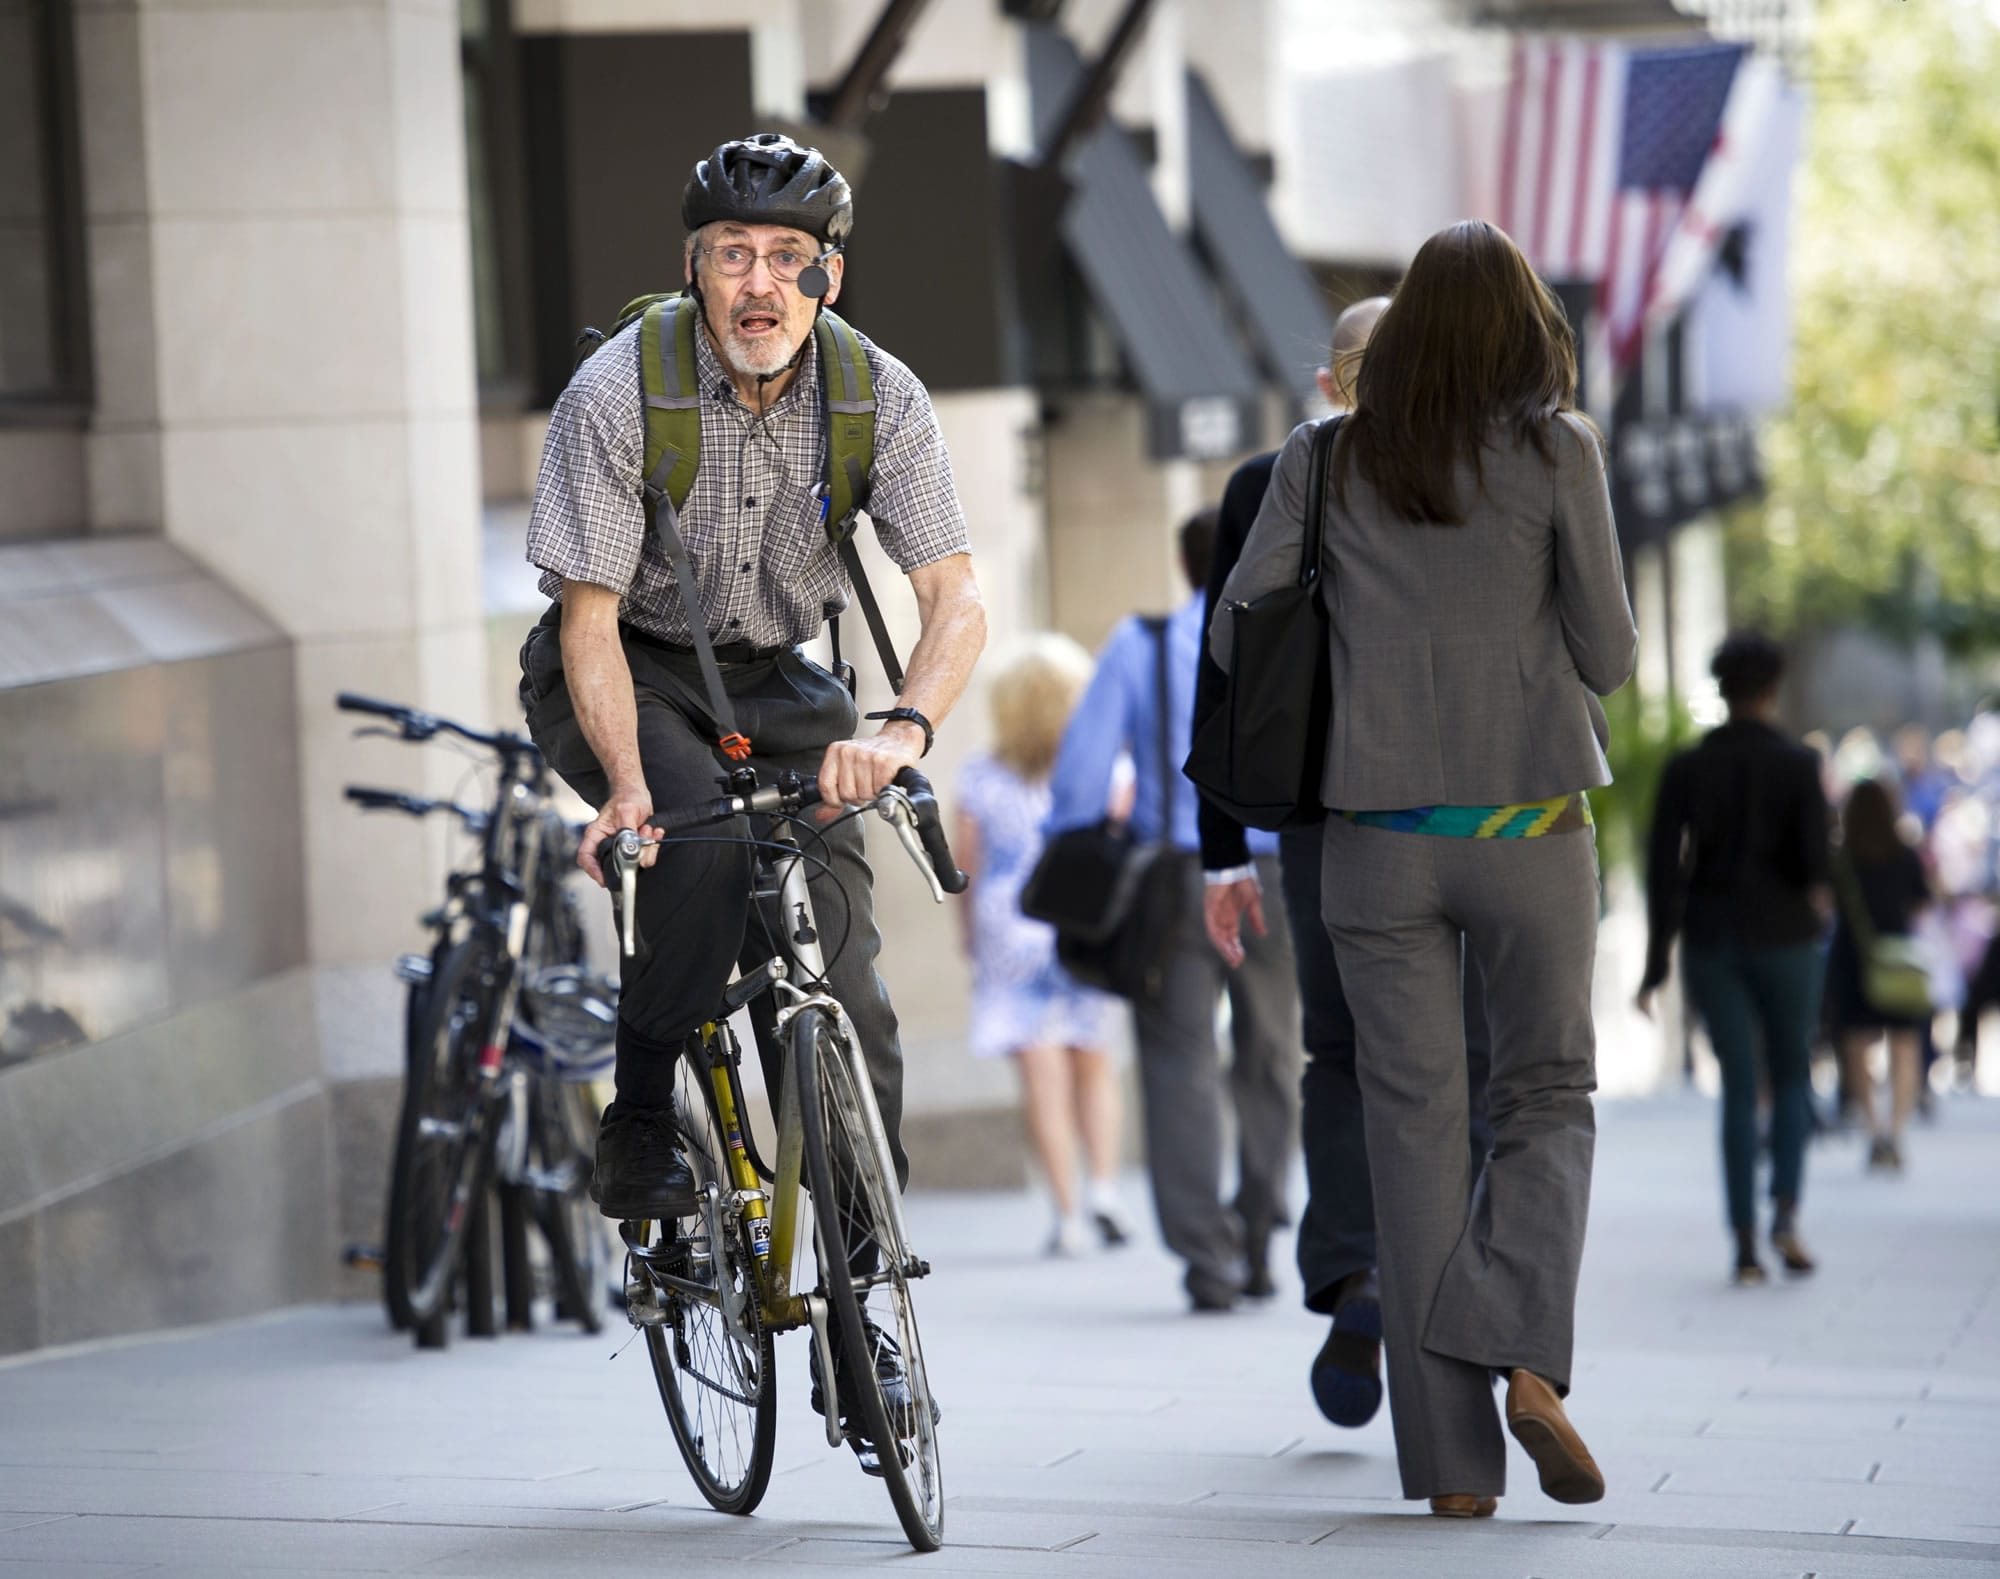 David Hilfiker, of Washington, D.C., leaves the National Press Club on his bike Sept. 19 after talking about his life with Alzheimer's disease.